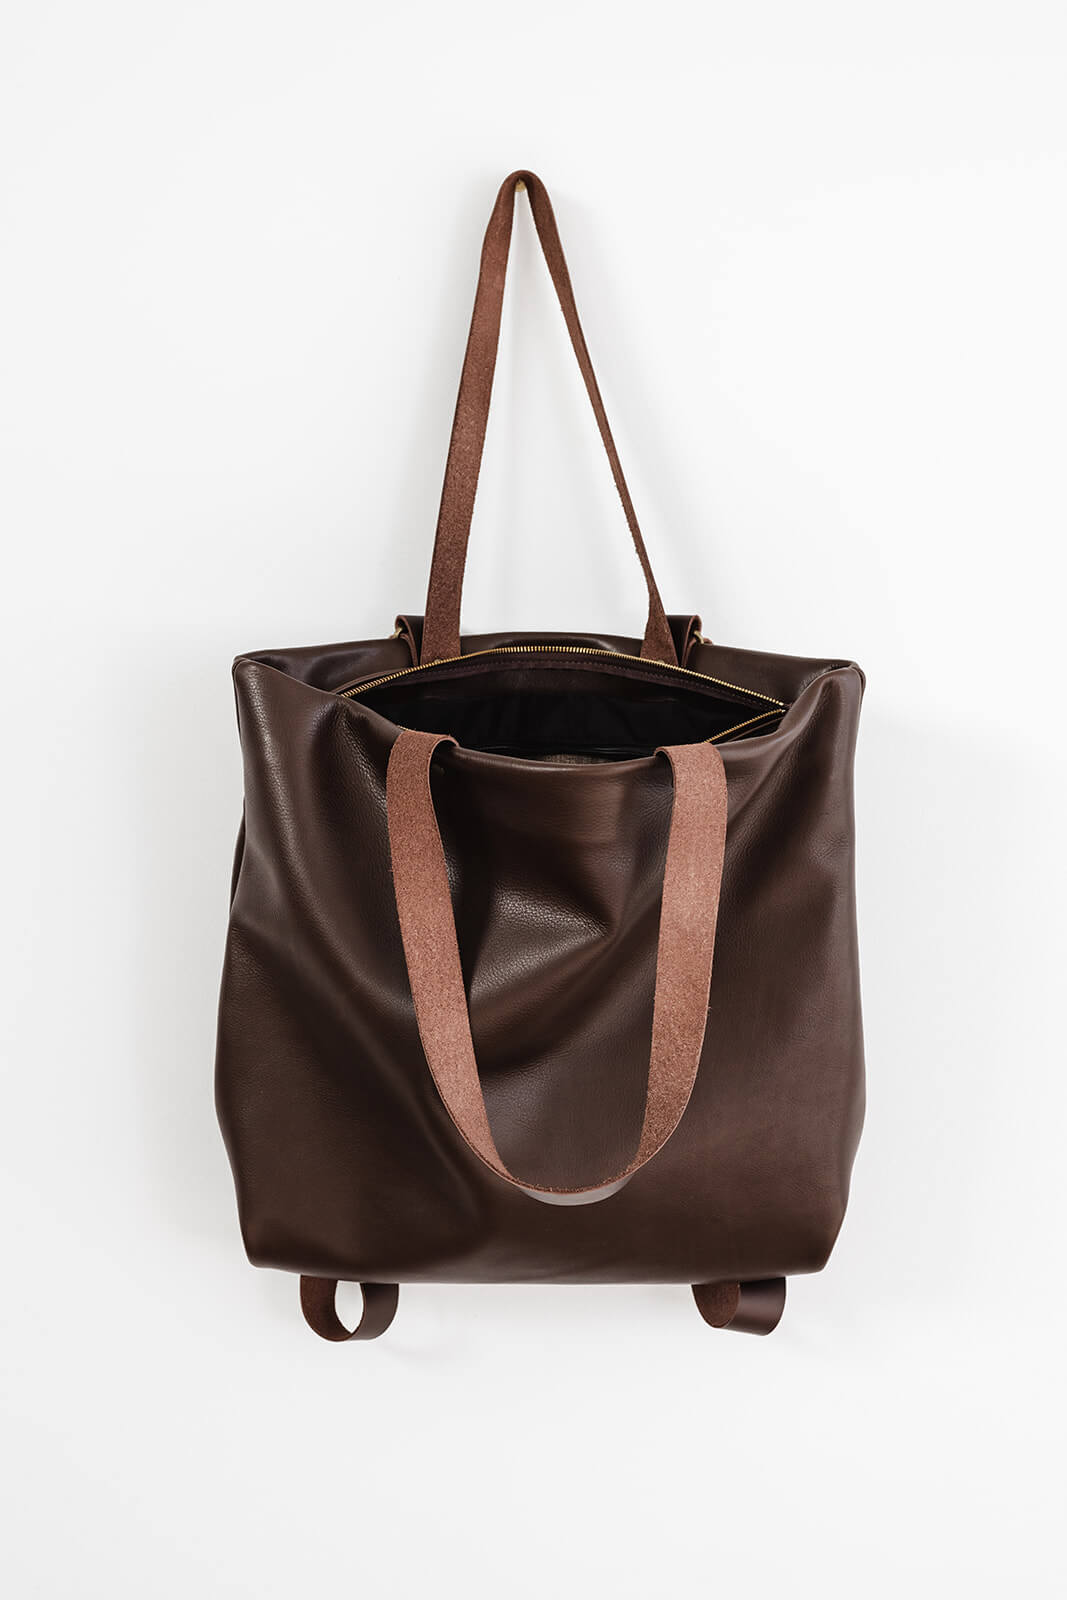 Product pic of the Ella Jackson Chocolate Brown Leather Backpack & Tote. The bag is hanging as a tote on a white background with the zip undone to reveal the black lining